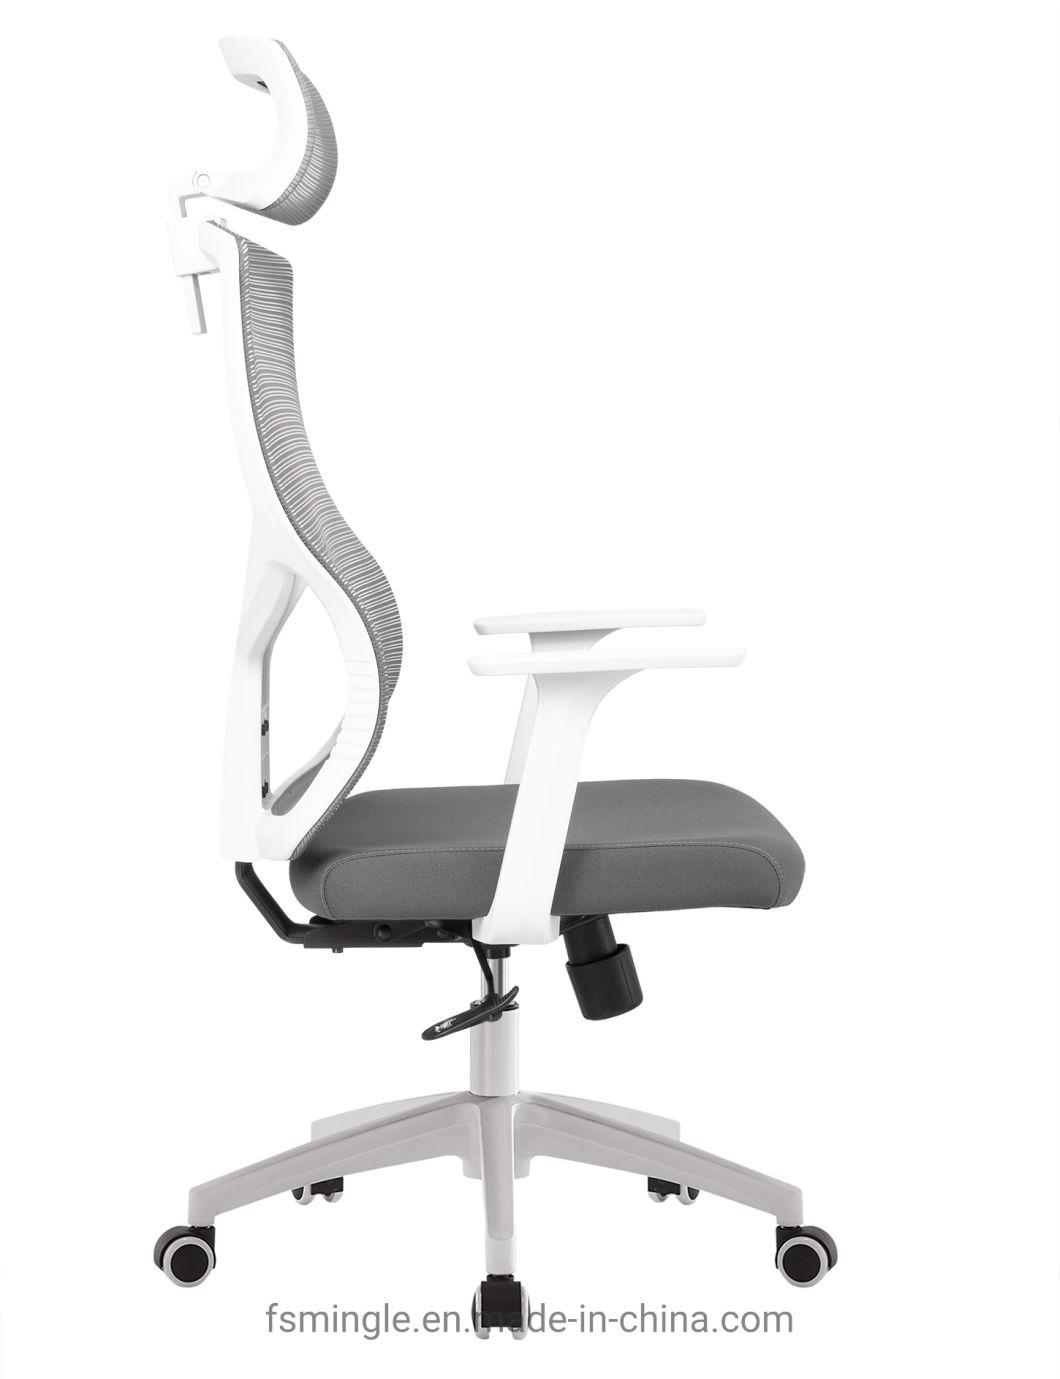 High Quality Modern Luxury Adjustable High Back Ergonomic Executive Office Chairs